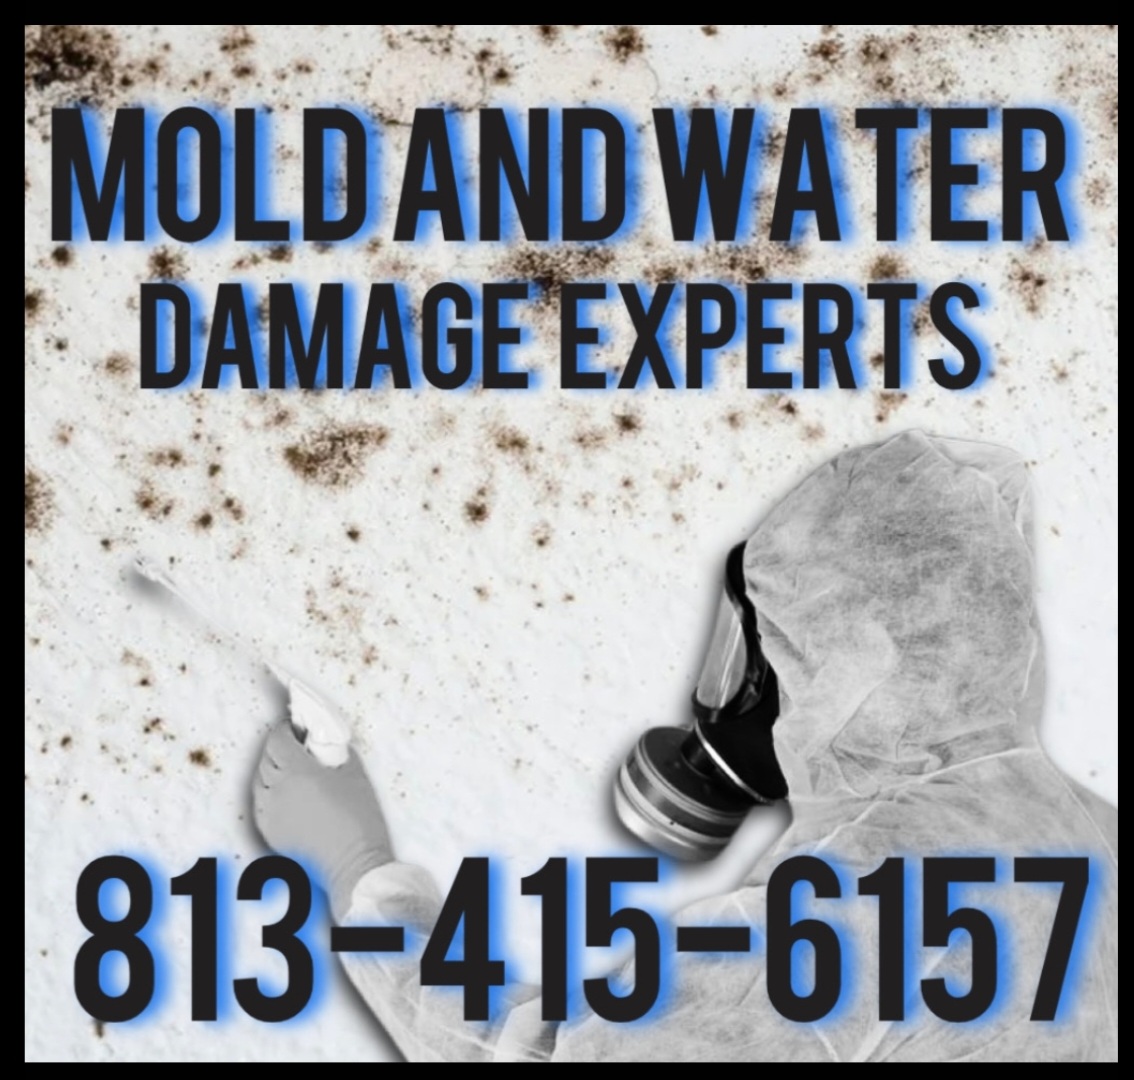 Mold and Water Damage Experts, LLC Logo